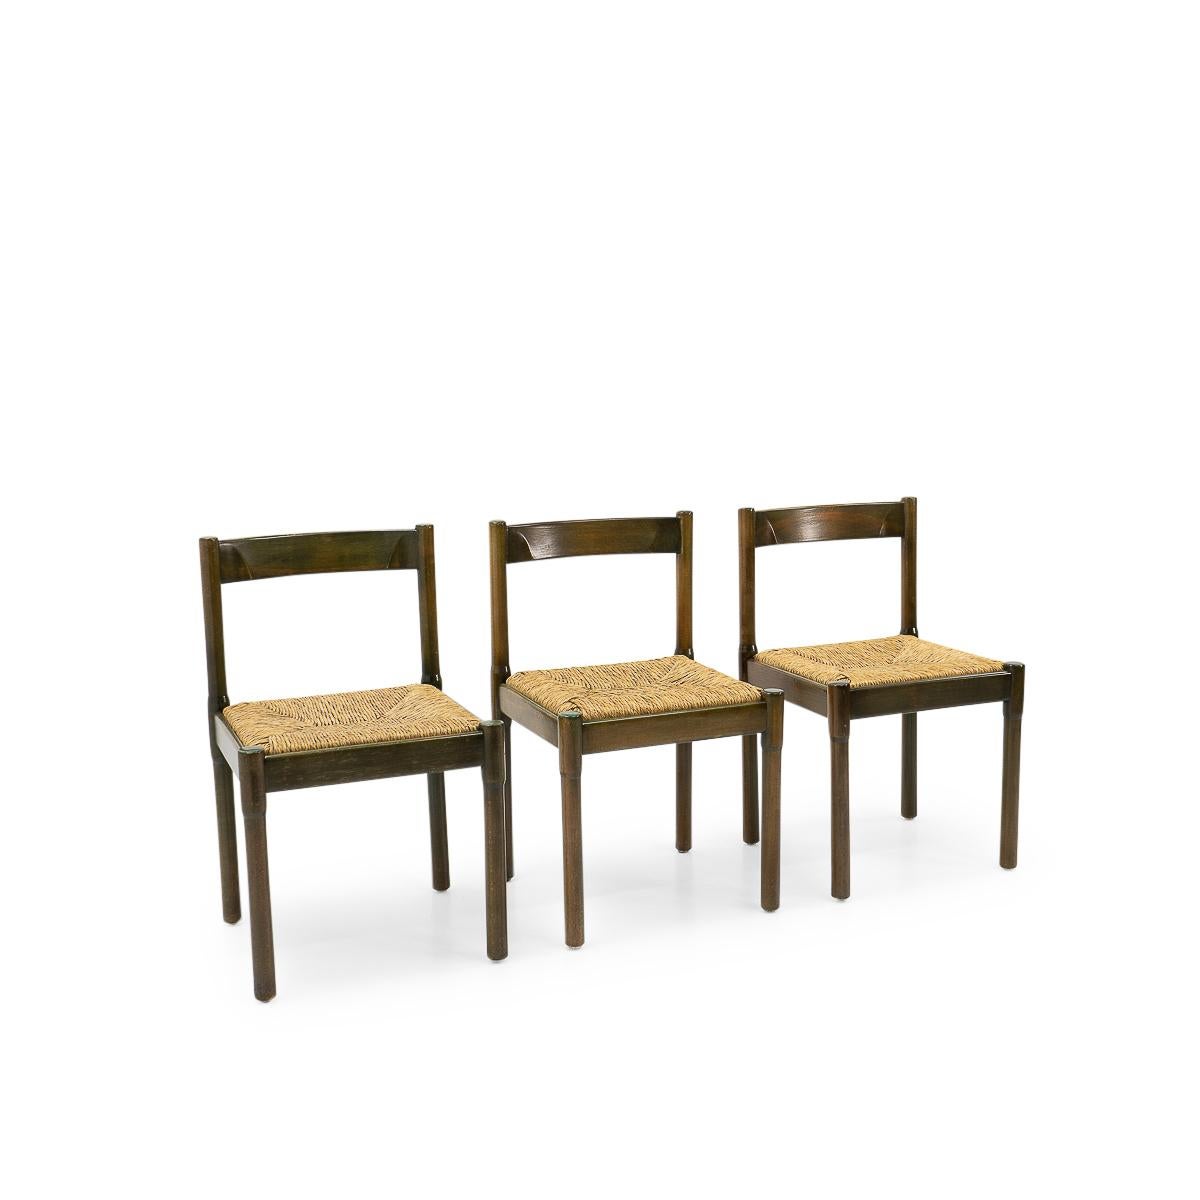 Please note only one chair left:

Original Carimate chairs designed by Vico Magistretti, produced by F.li Mario Luigi Comi during the 1960s. 

The chairs were originally aniline dyed in green, and due to the influence of time and sunlight they have